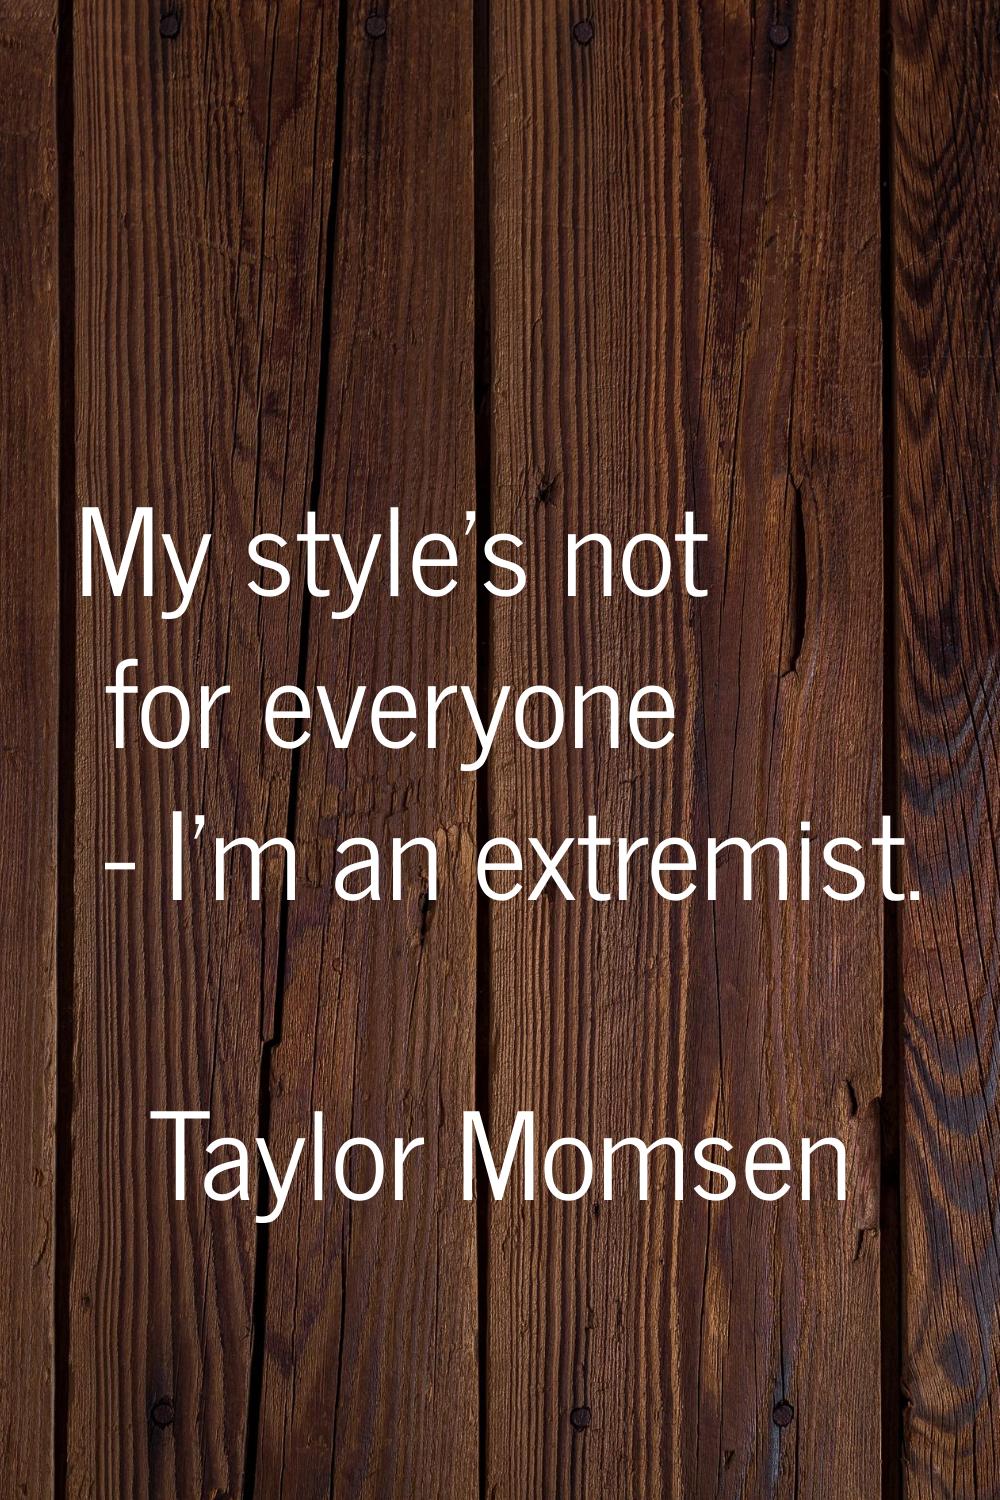 My style's not for everyone - I'm an extremist.